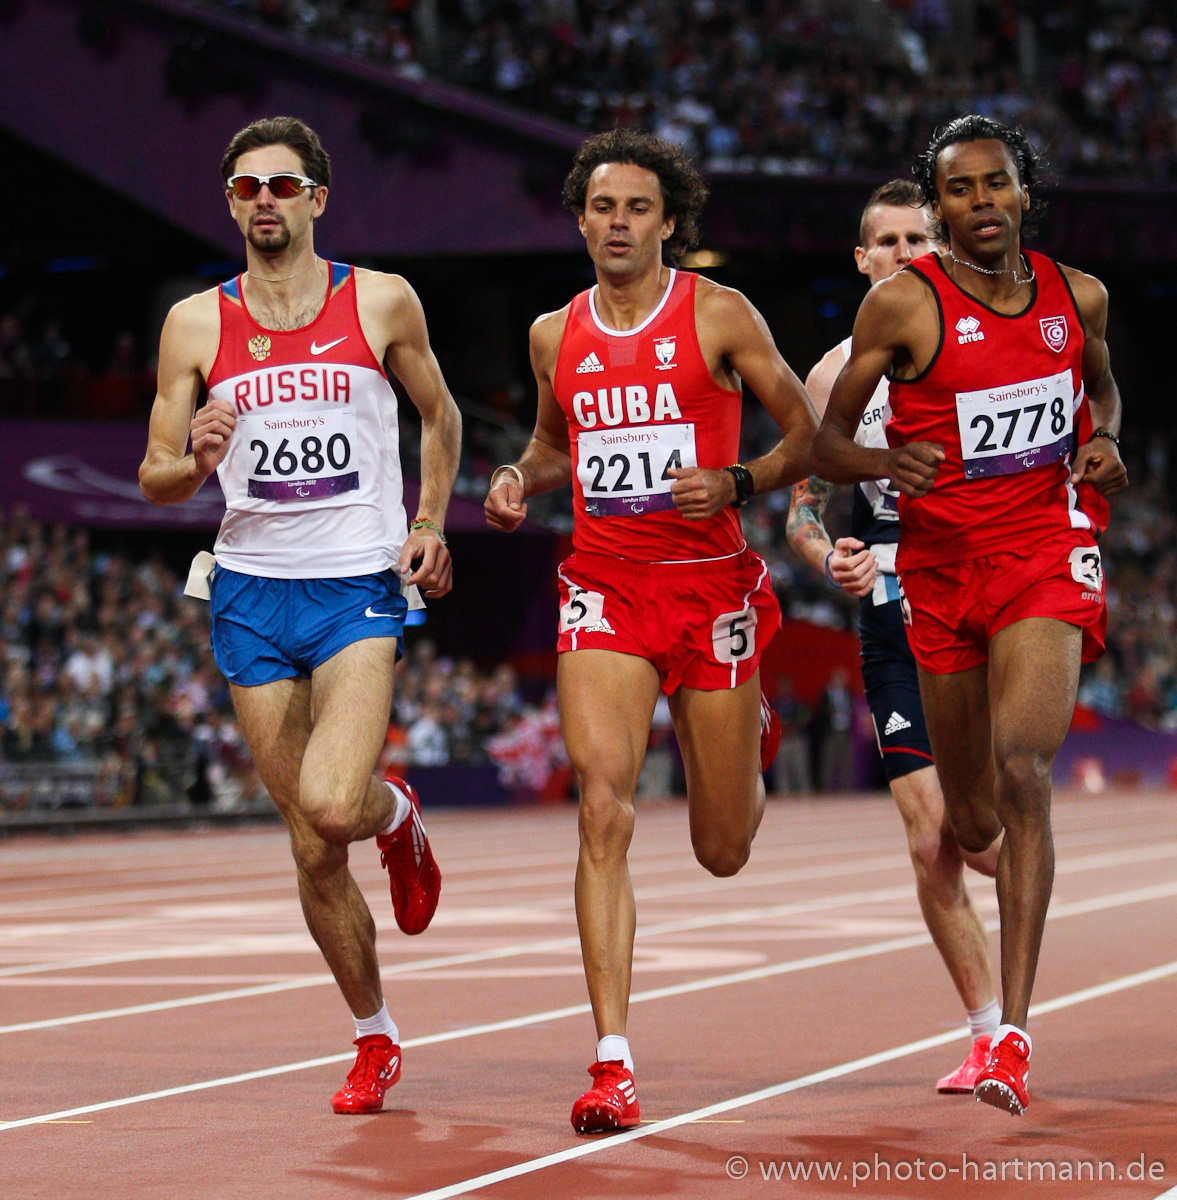 Four runners dressed in shorts and vest competing on a red athletics track.